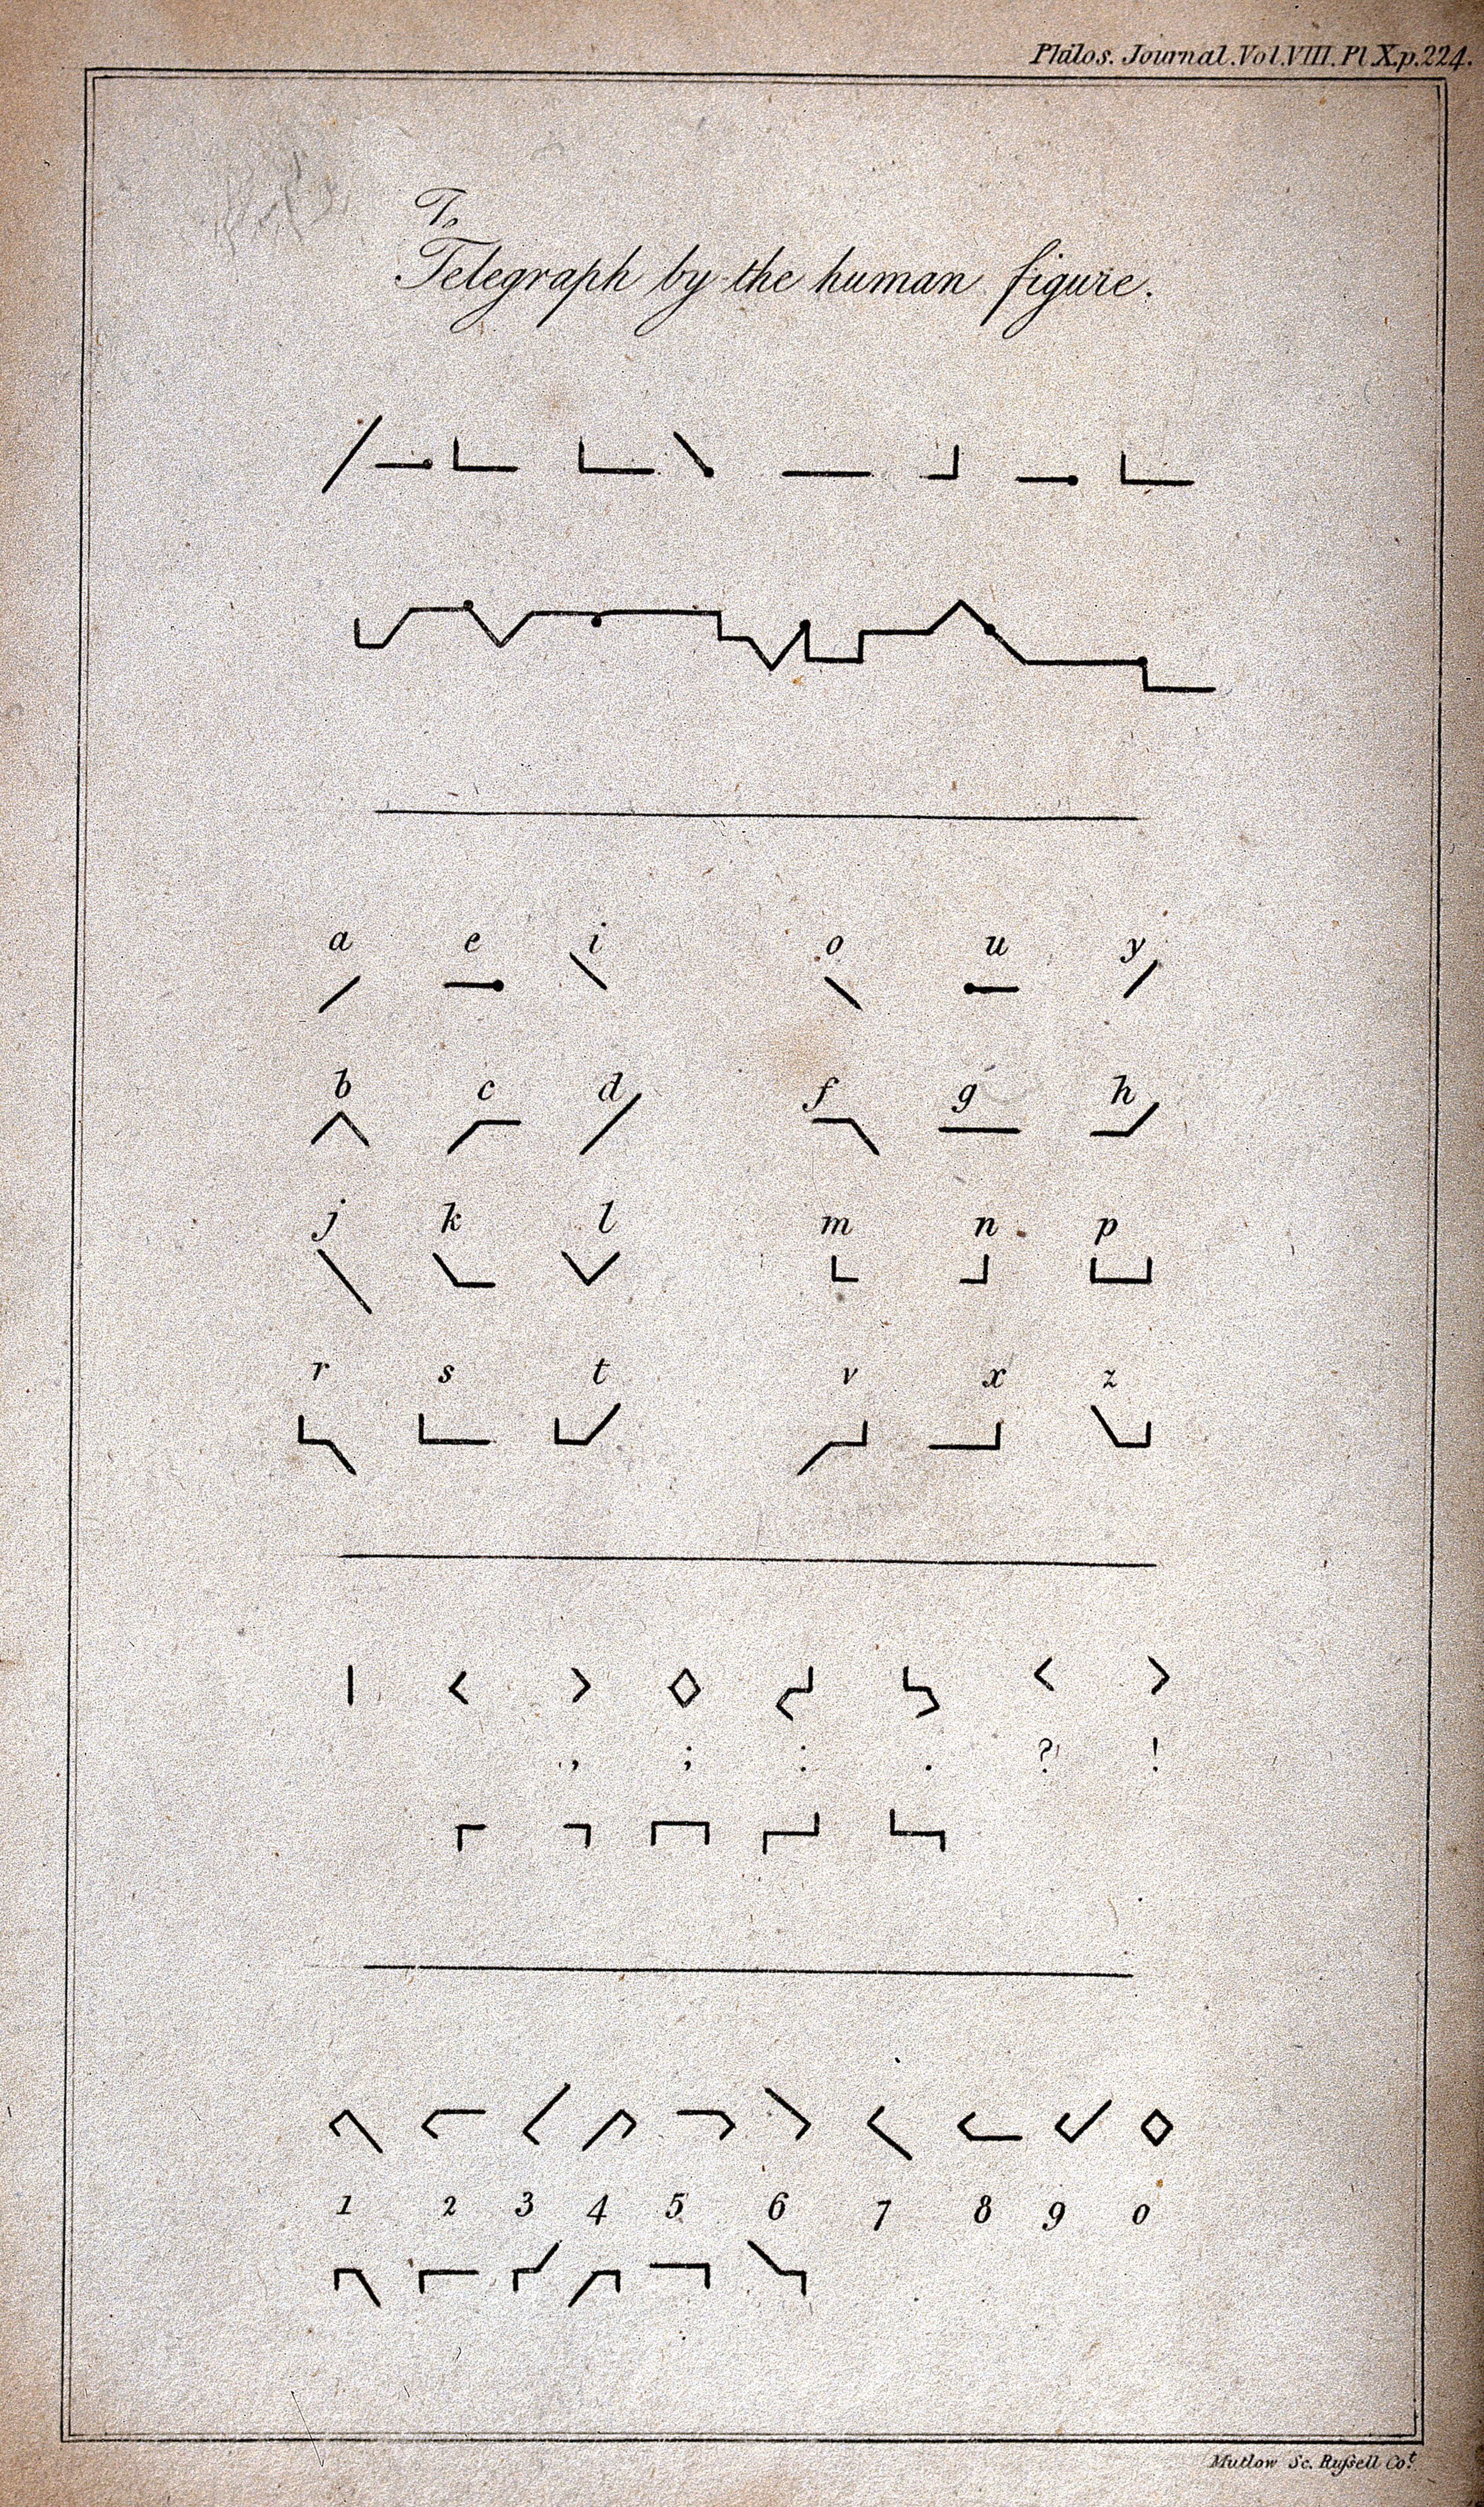 Telegraphy: symbols used in to convey various letters and numbers telegraphically. Engraving by Mutlow.